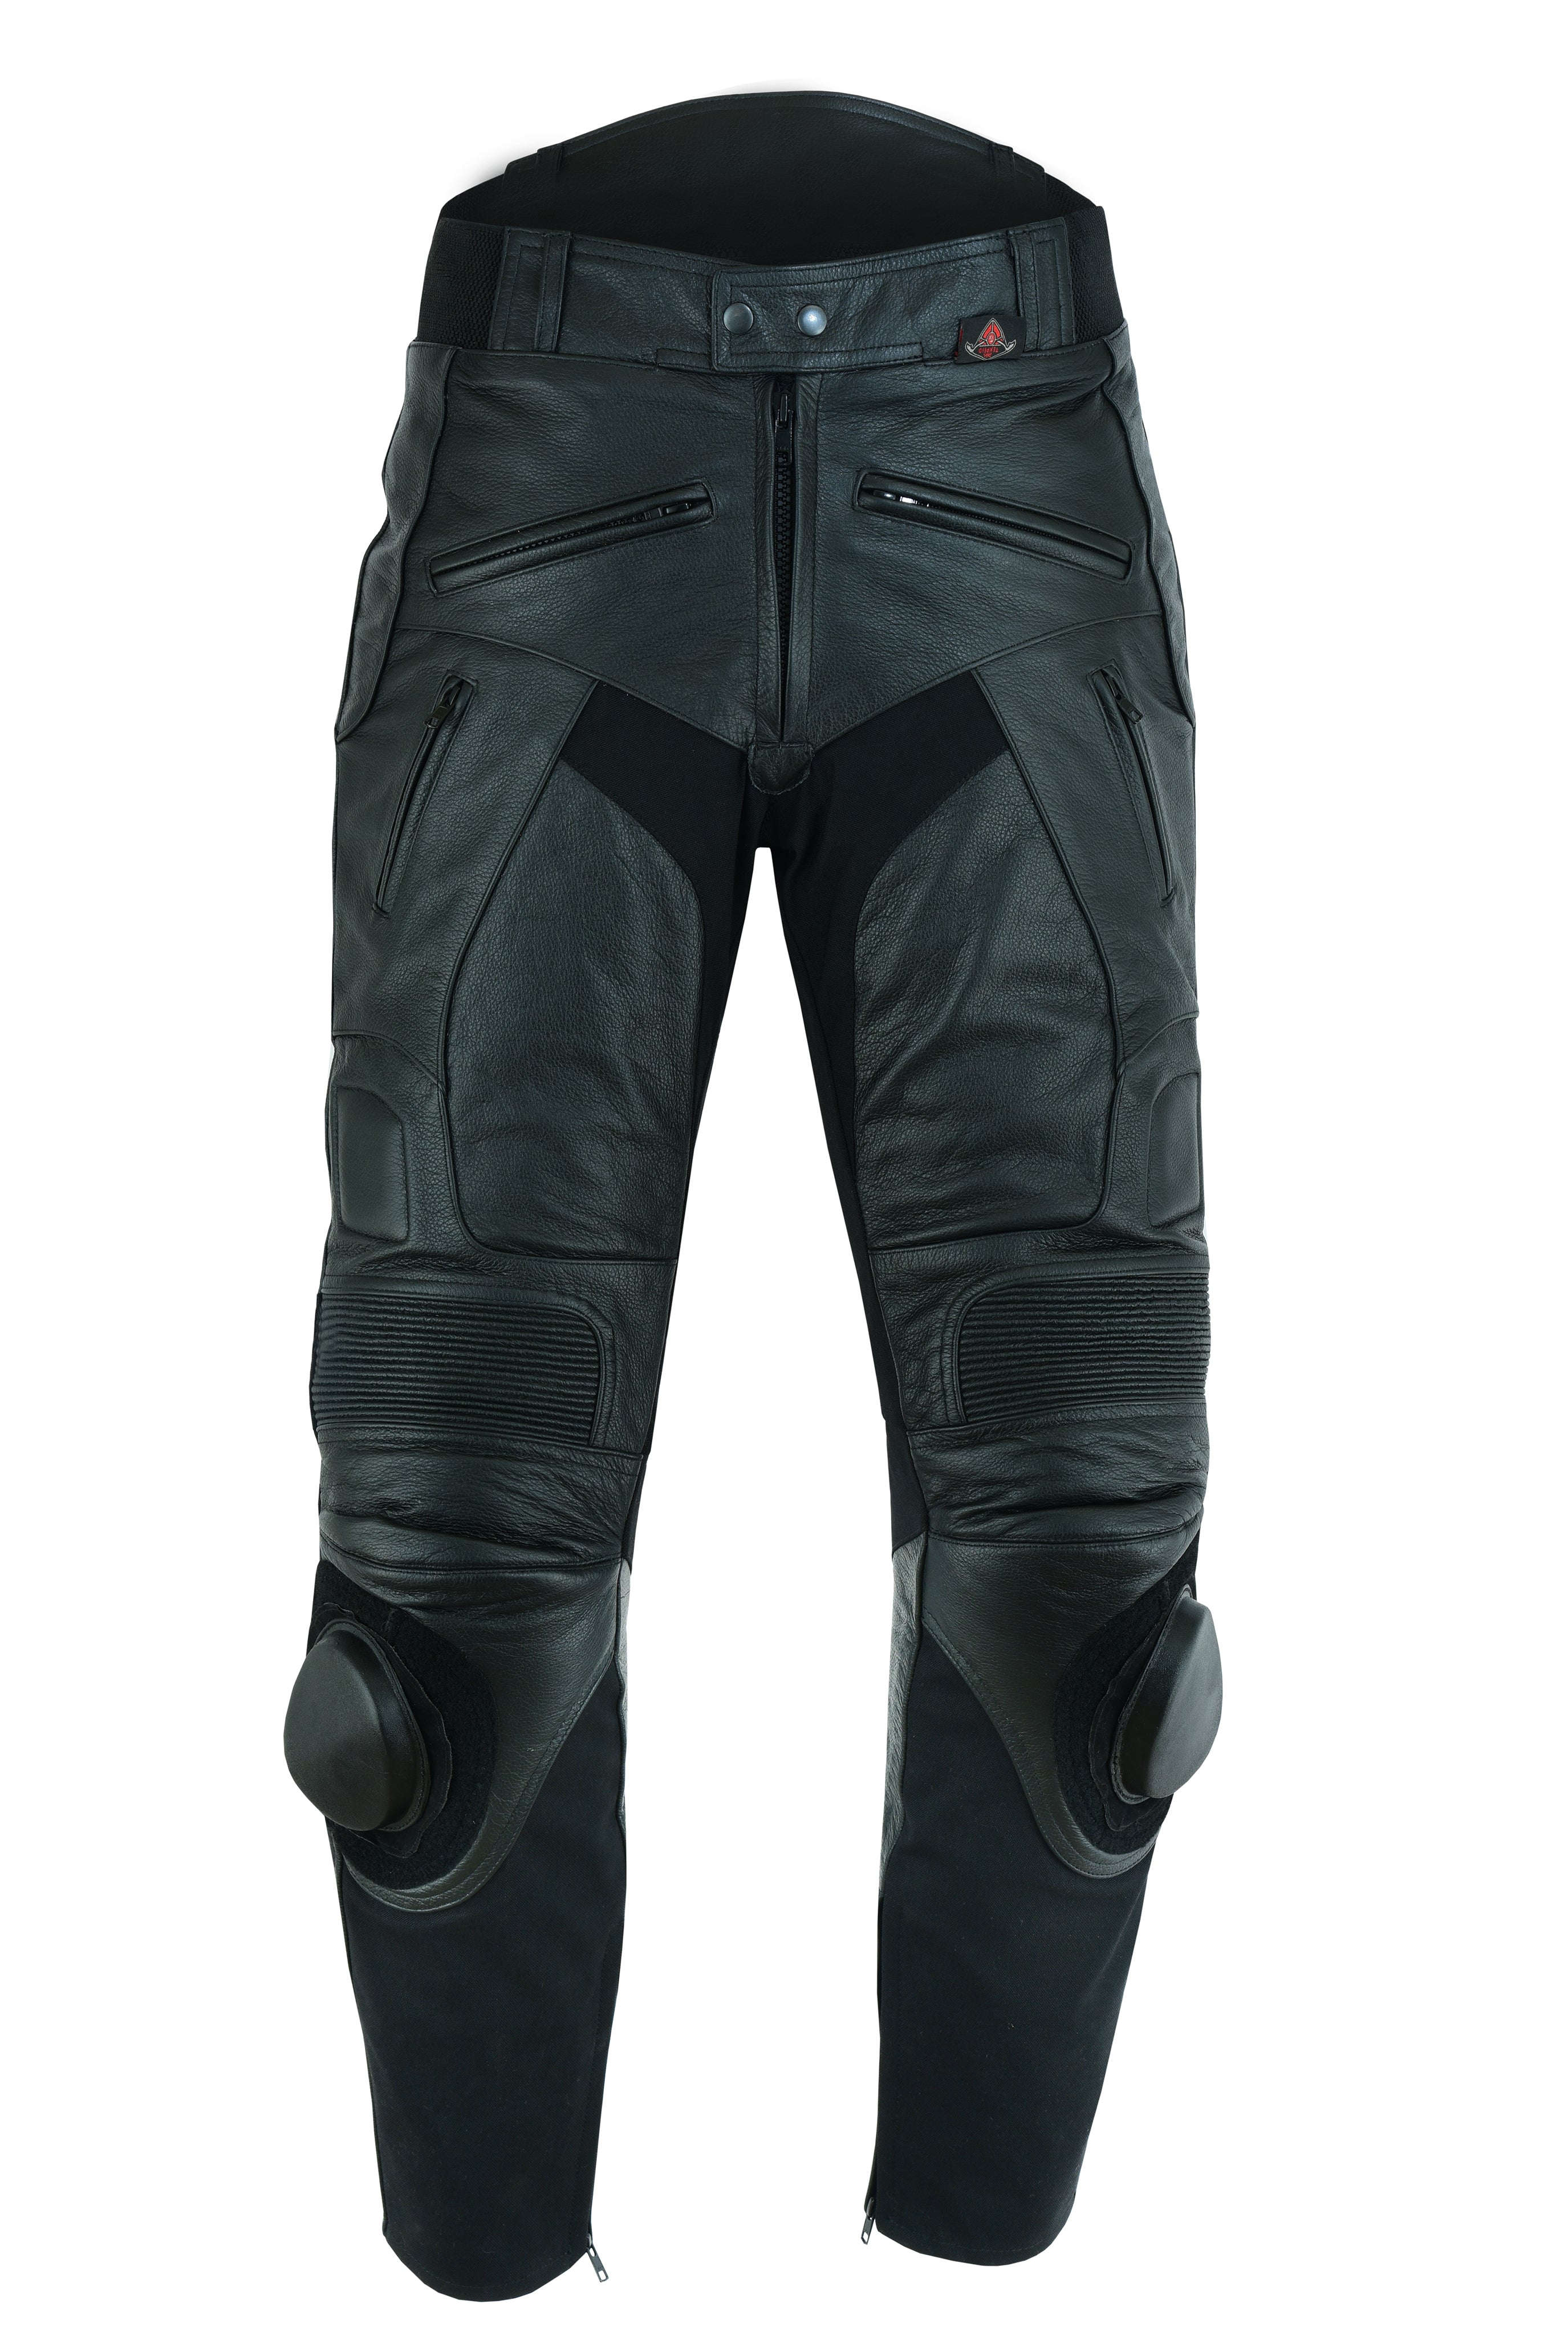 Exclusive Leather Motorbike Biker Trousers Motorcycle With CE